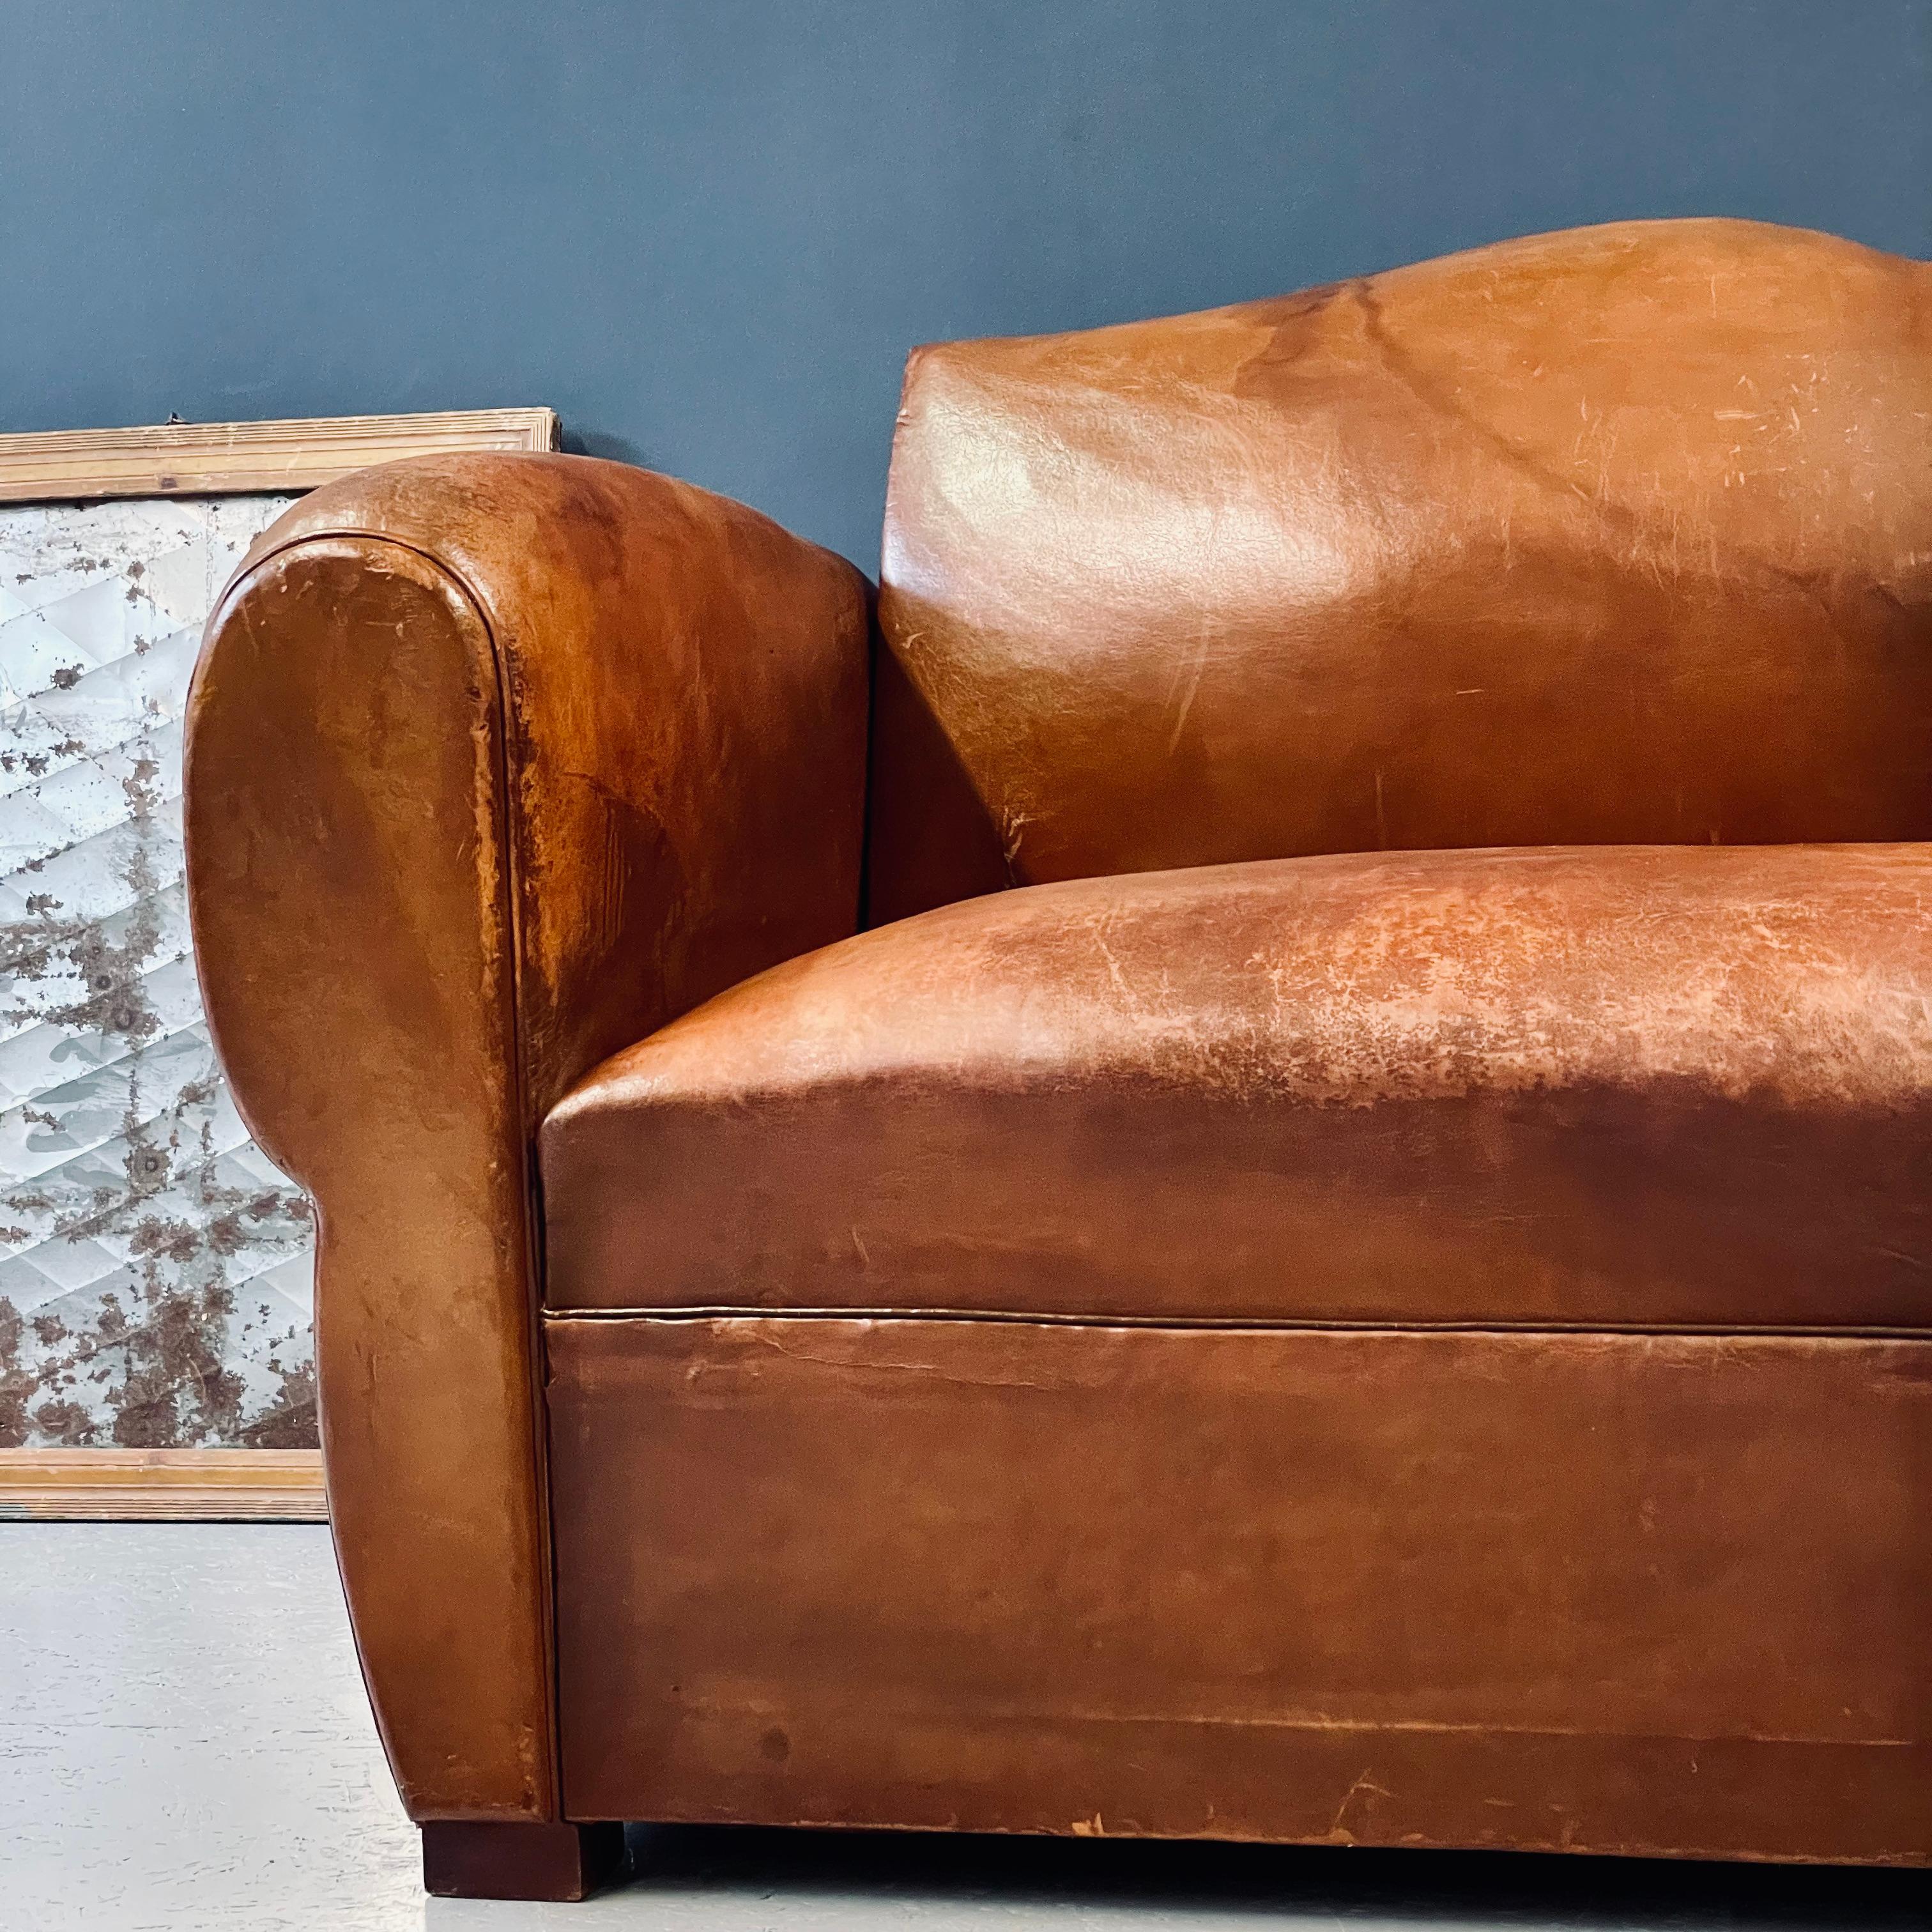 Mid-century French leather Moustache Club Sofa. This is a fully functional fold out sofa bed from the 1940`s. A two seater classic couch with retractable bed springs. The 70 year old leather has a wonderful patina but the piece does have signs of